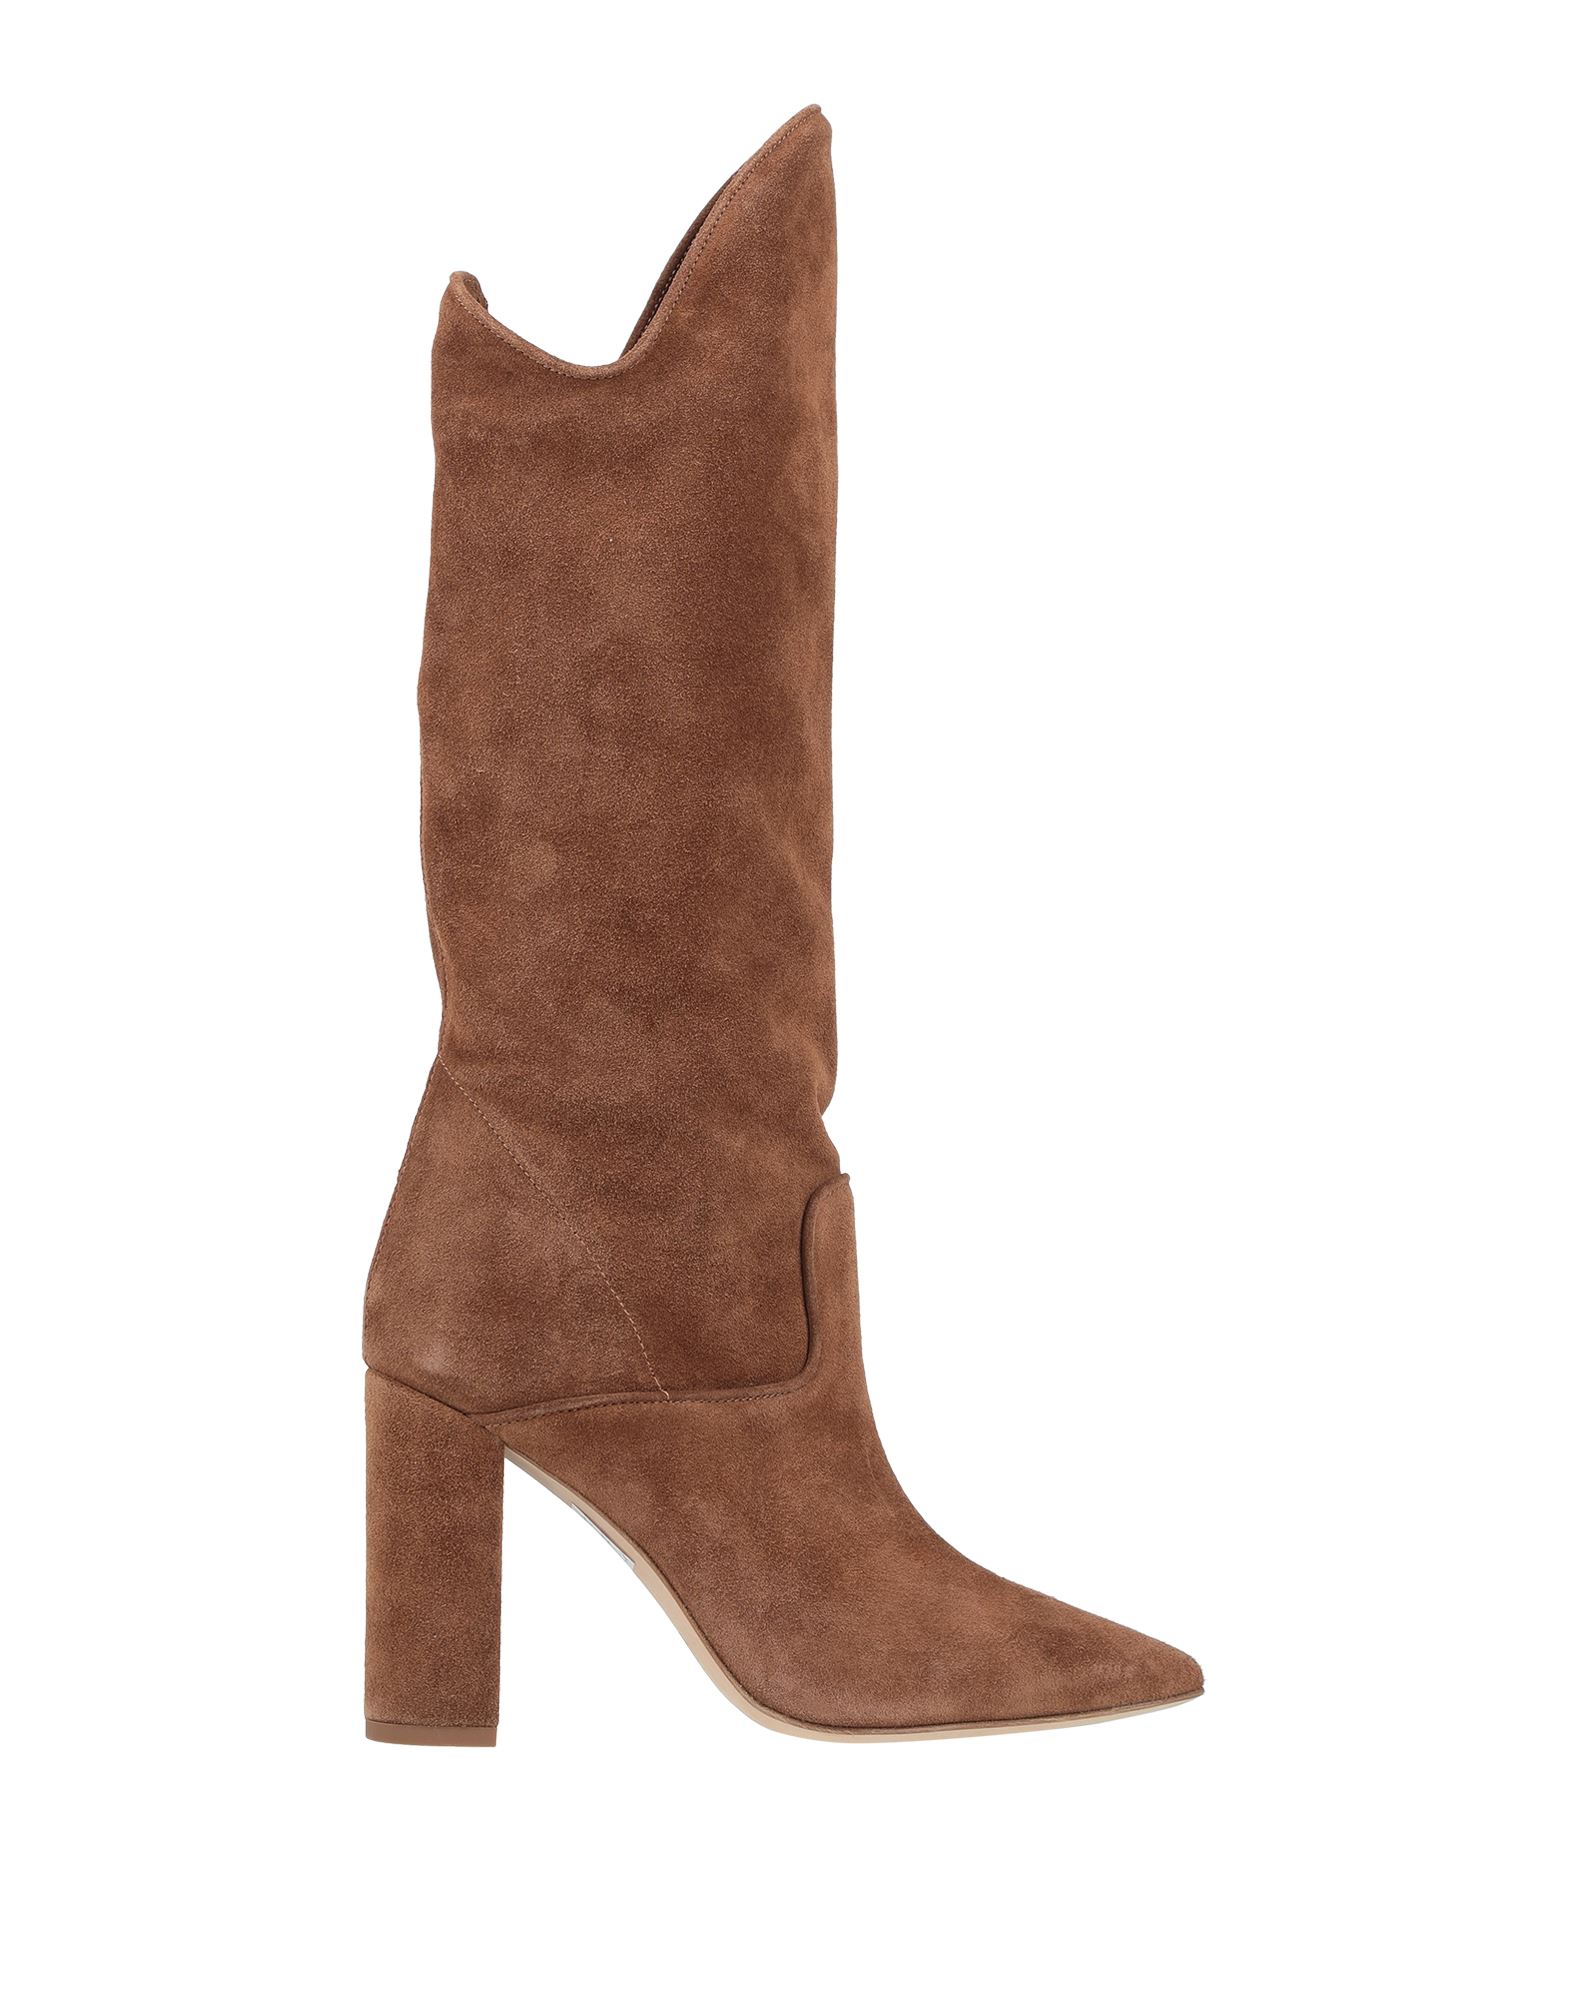 By A. Knee Boots In Camel